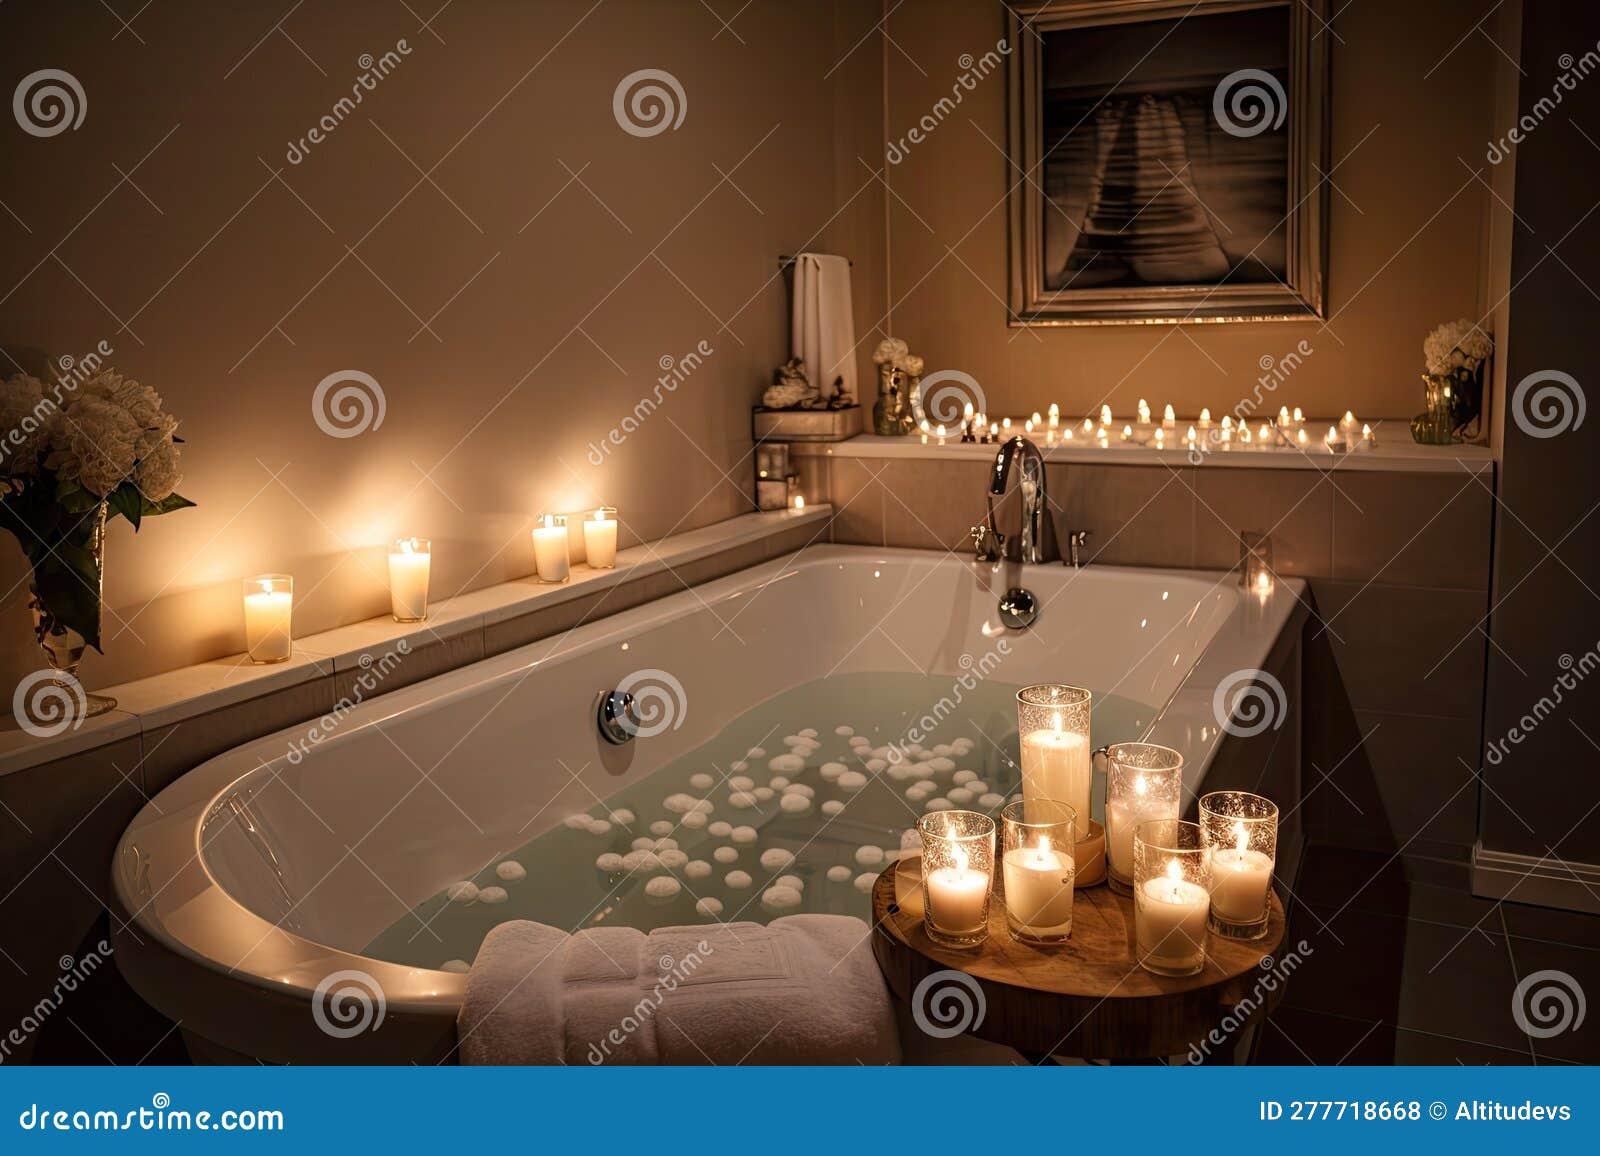 bathtub with candles in romantic atmosph, Stock Video